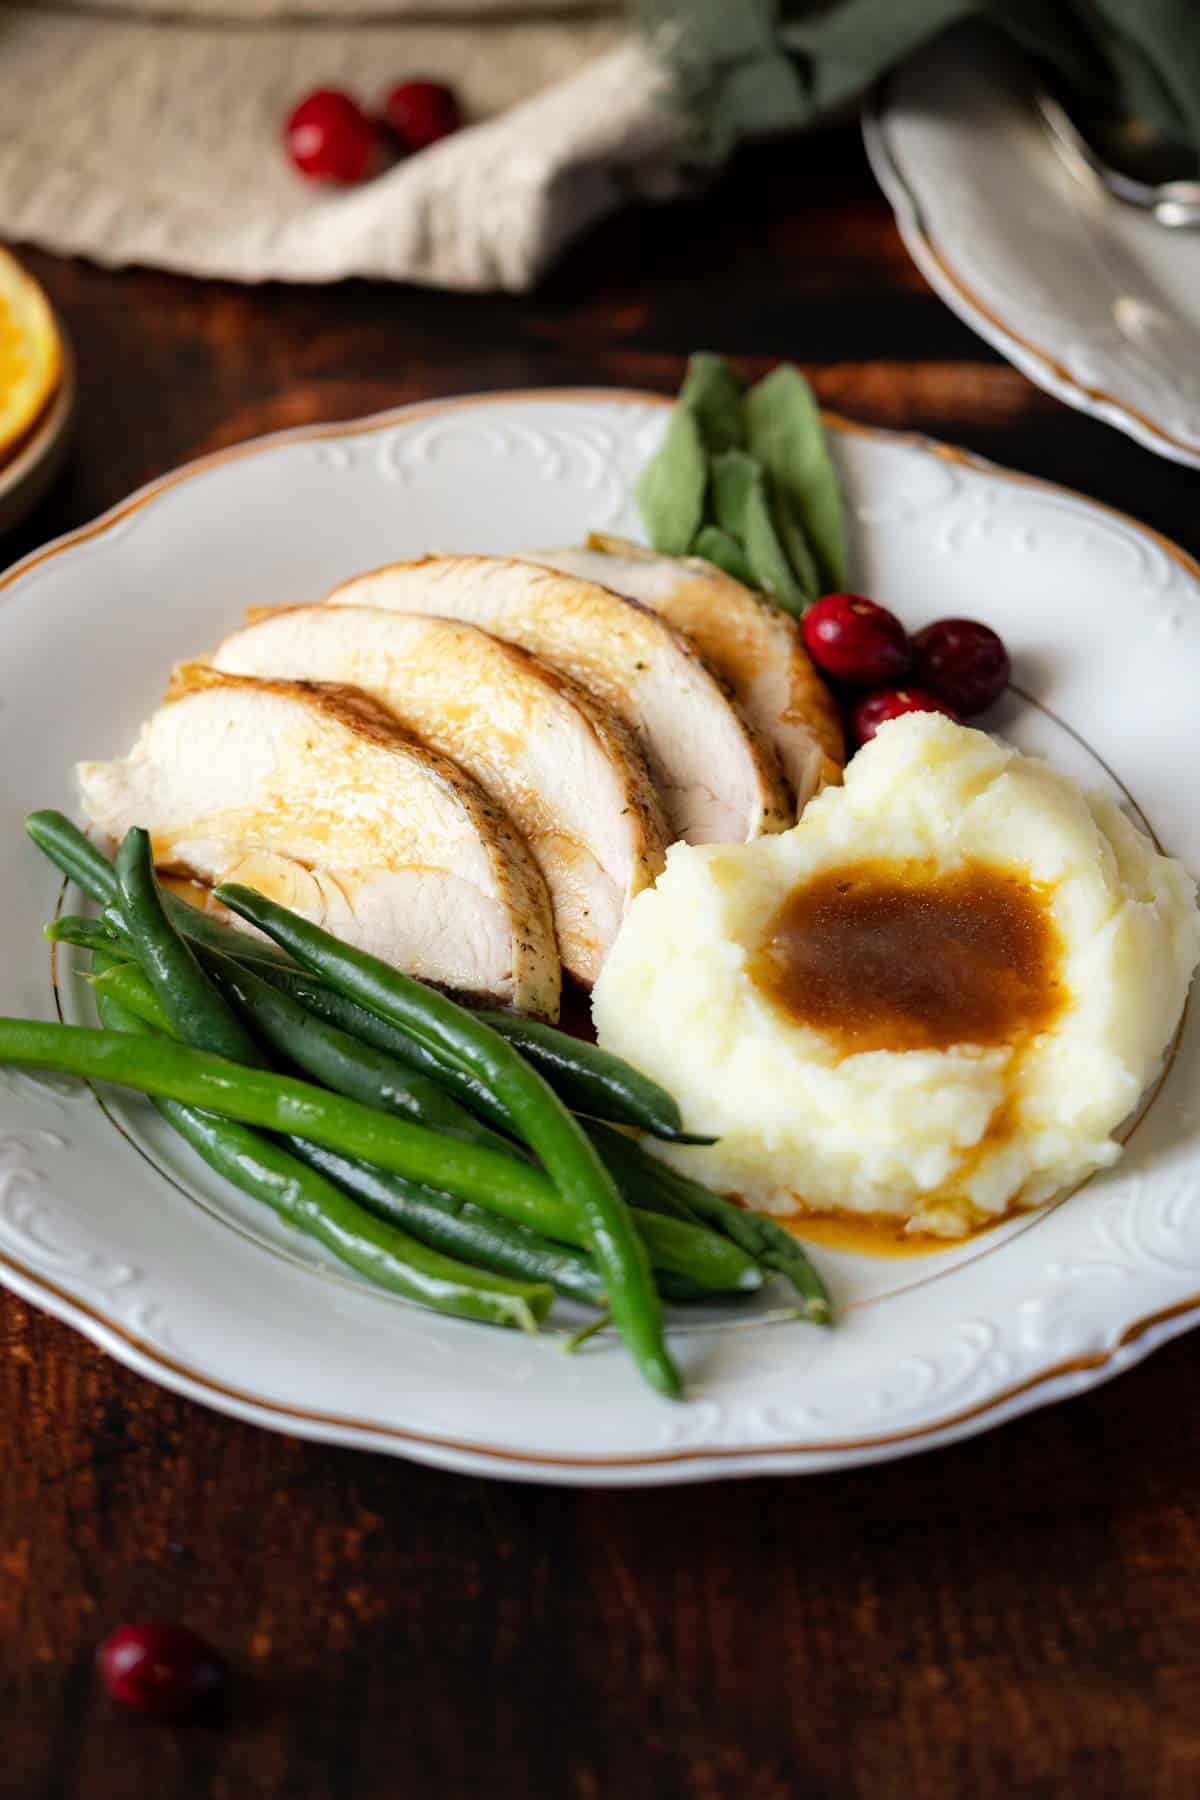 Turkey served with mashed potatoes and green beans.